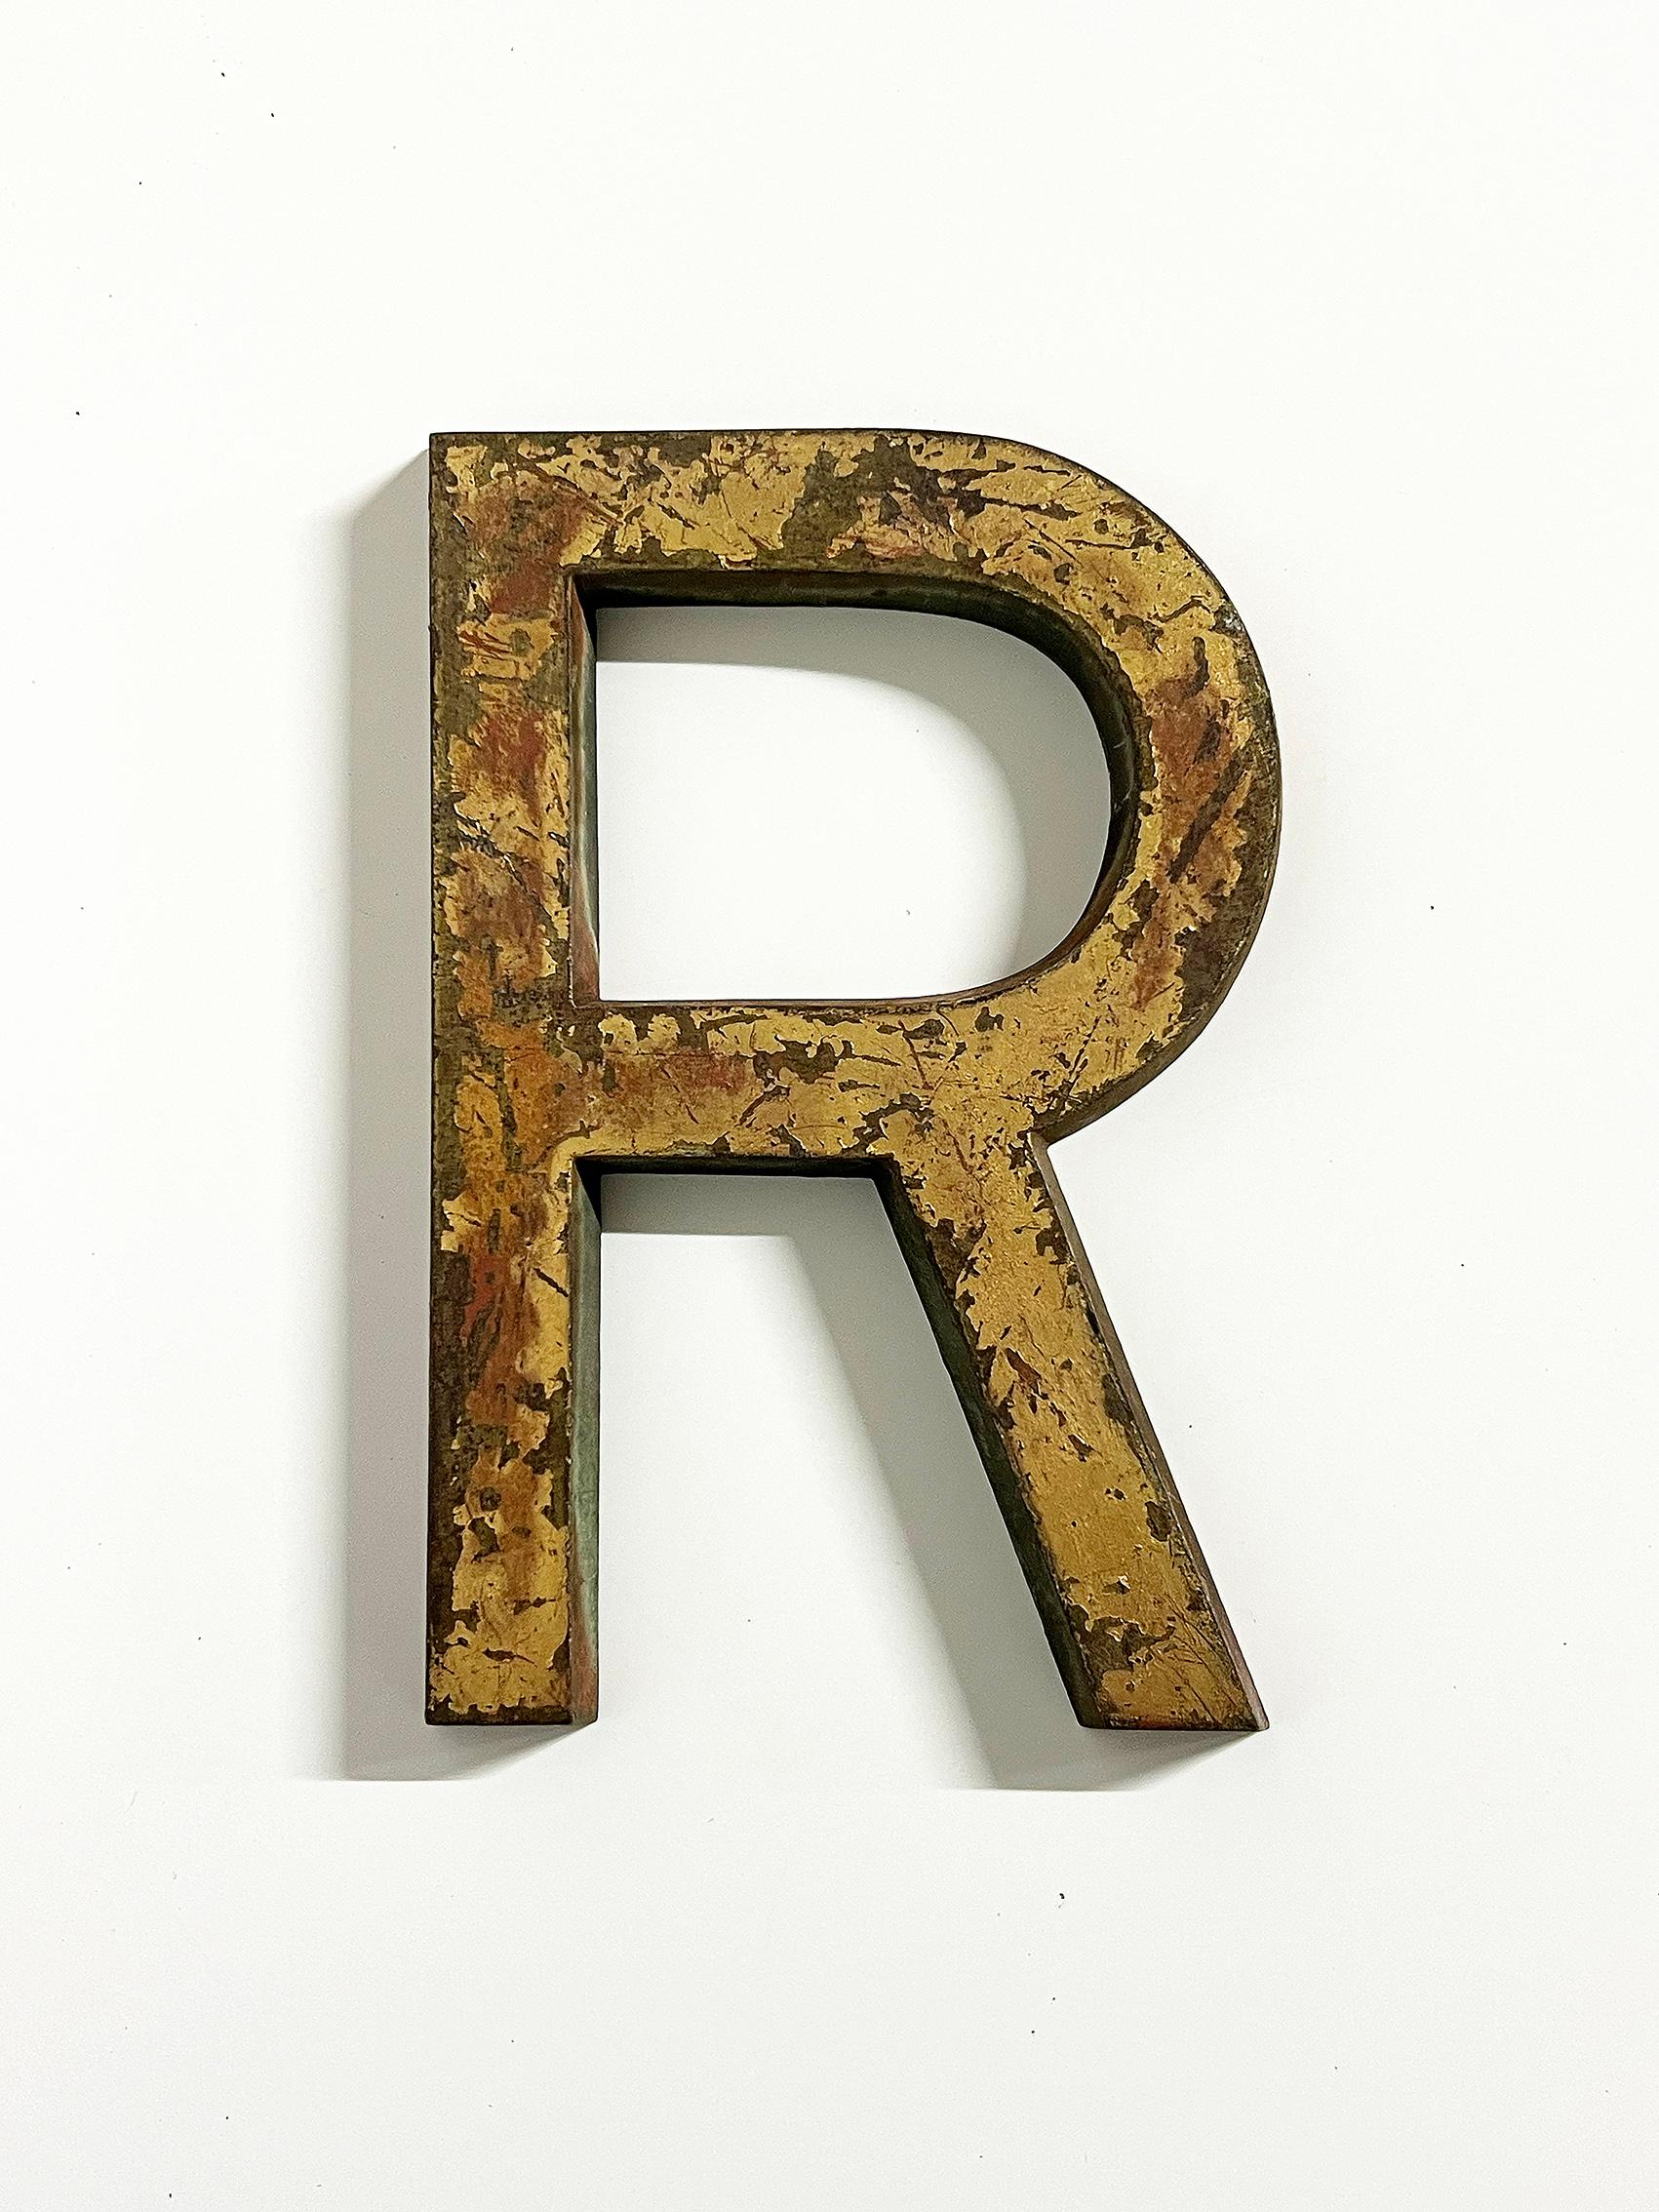 Vintage letter R in solid brass, covered with old paint (red & gold), Sweden ca 1940's.
Wear and patina consistent with age and use. Paint loss as seen on the pictures.

